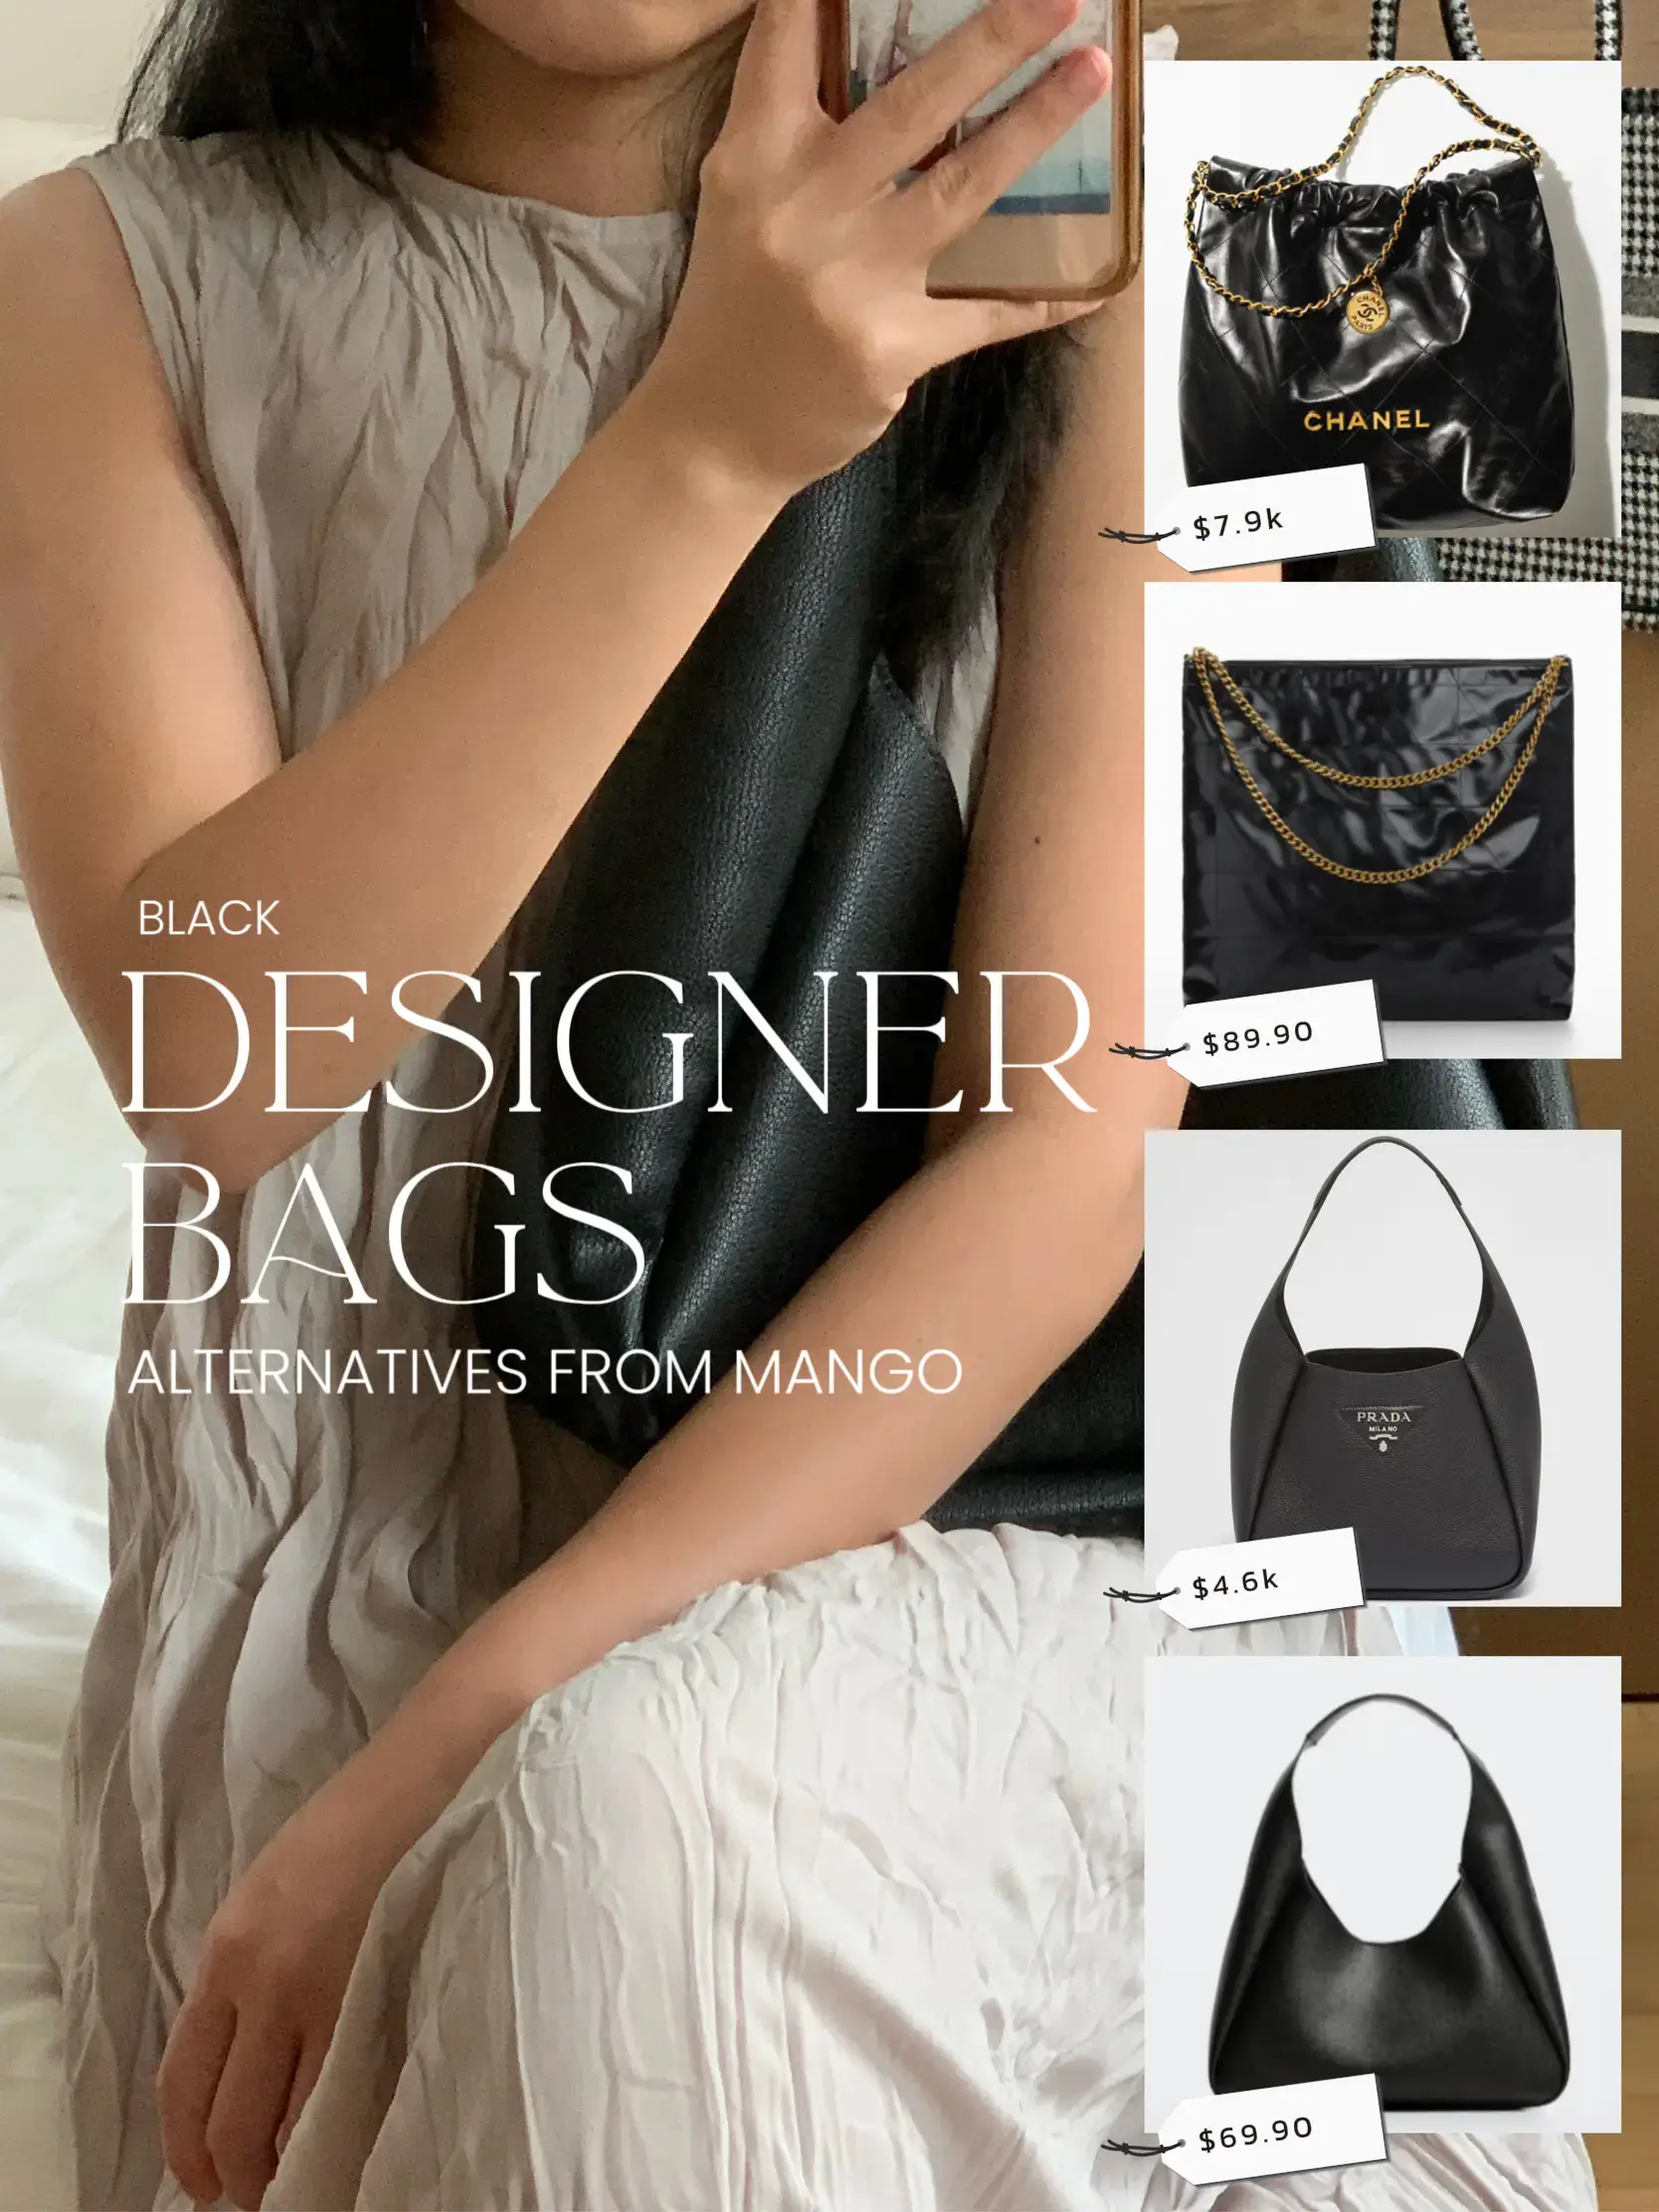 Mango's Bag Is So Similar To This Designer Style